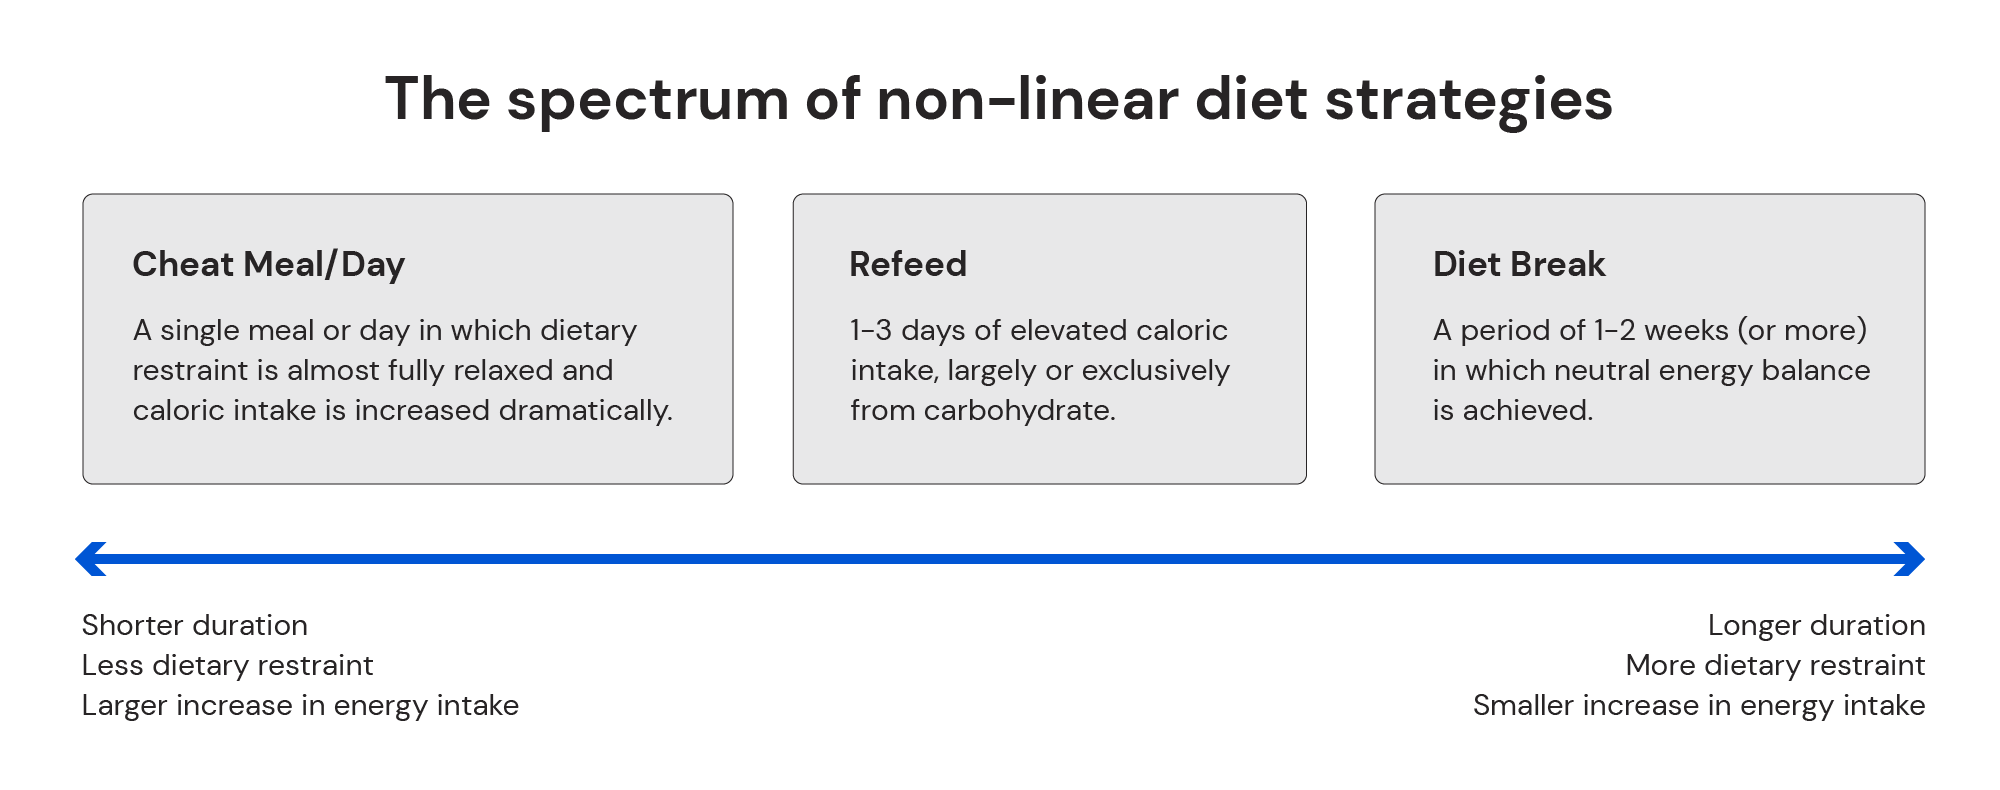 The spectrum of non-linear diet strategies